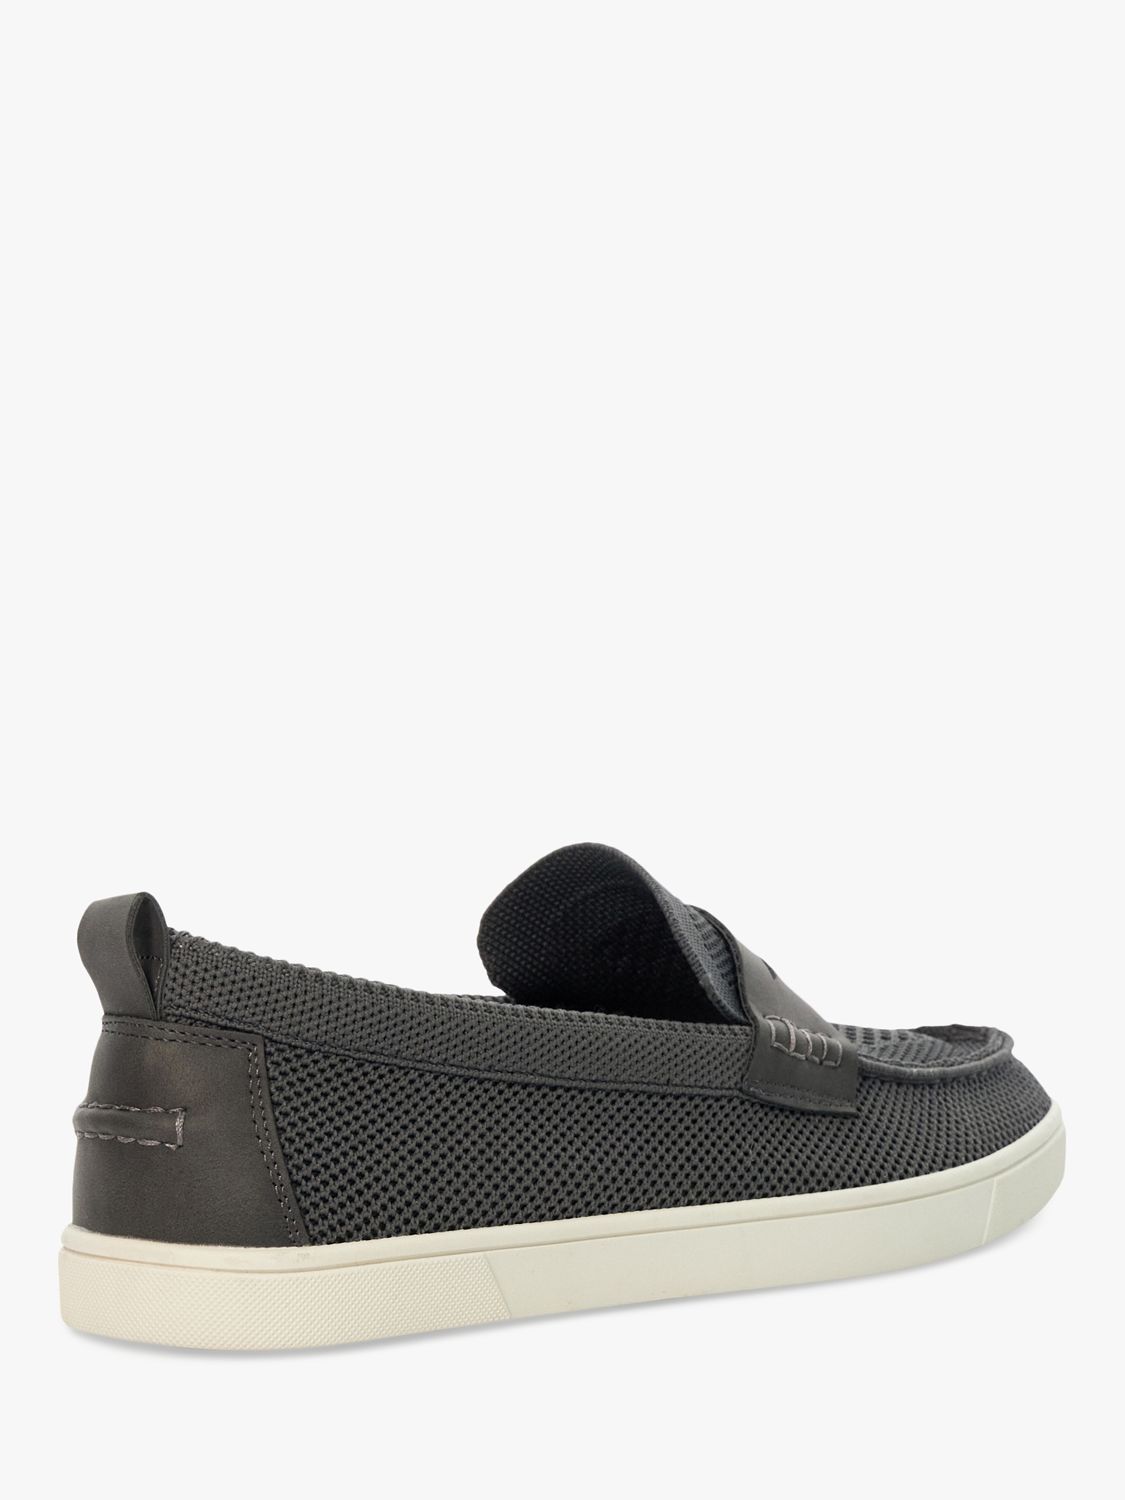 Buy Dune Baisley Knit Penny Loafers Online at johnlewis.com